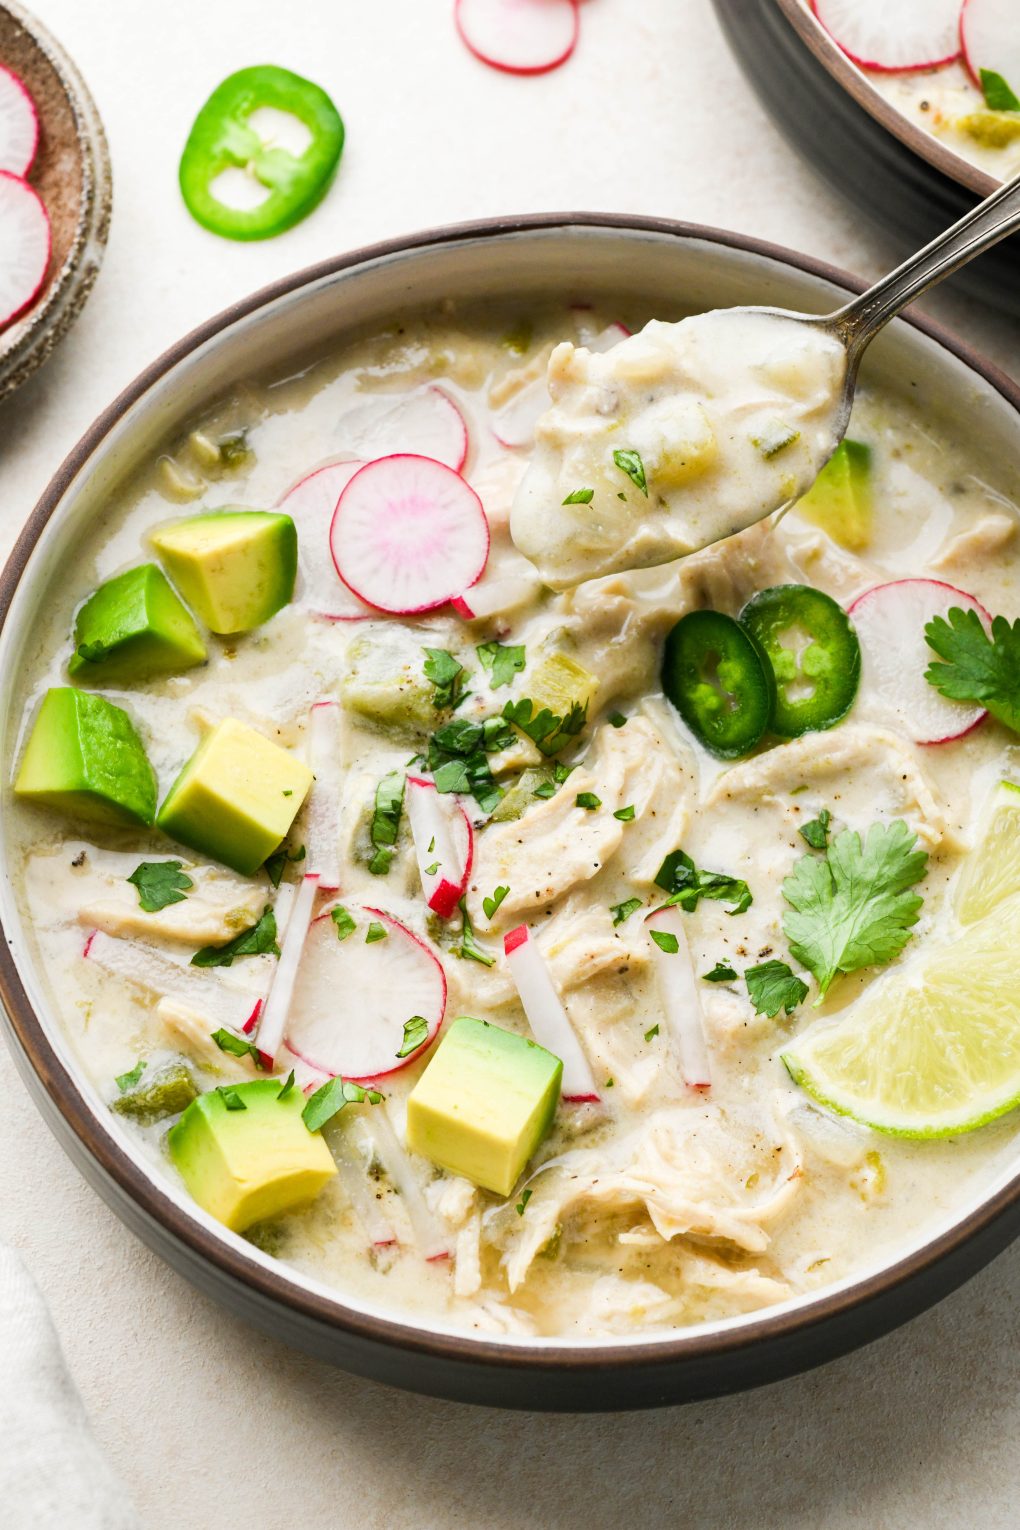 Wide bowl of creamy Whole30 white chicken chili topped with radishes, avocado, cilantro, and lime wedges. A spoon is lifting out one creamy bite. On a light cream background surrounded by some scattered herbs. 